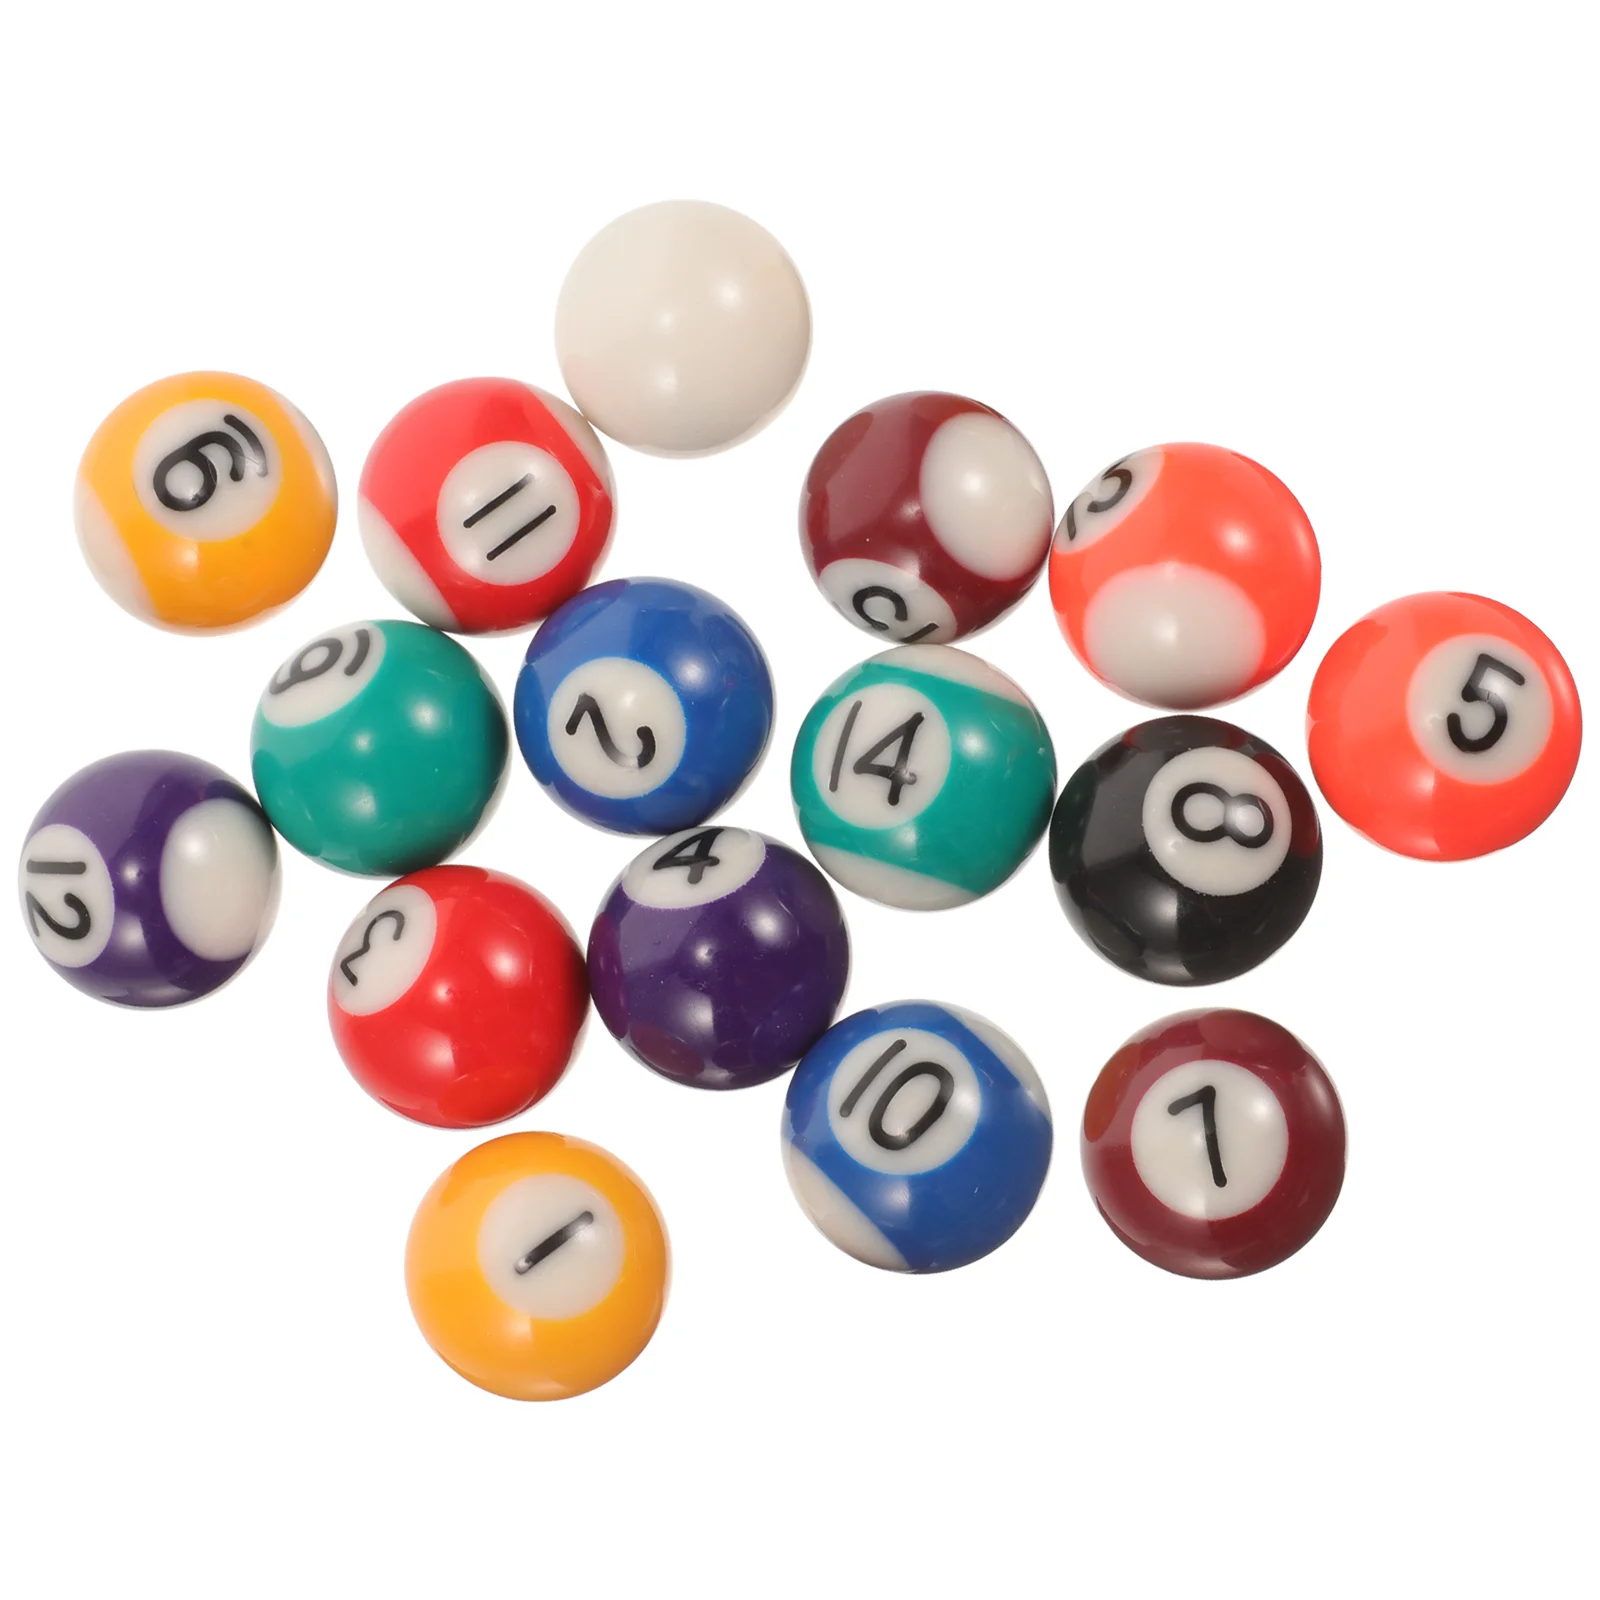 billiard cue ball resin billiard balls accessory replace replaceable white pool balls resin equipment wear resistant mixed 1 Set of Miniature Billiard Ball Toys Replaceable Billiard Ball Toys Resin Pool Balls Billiard Necessity